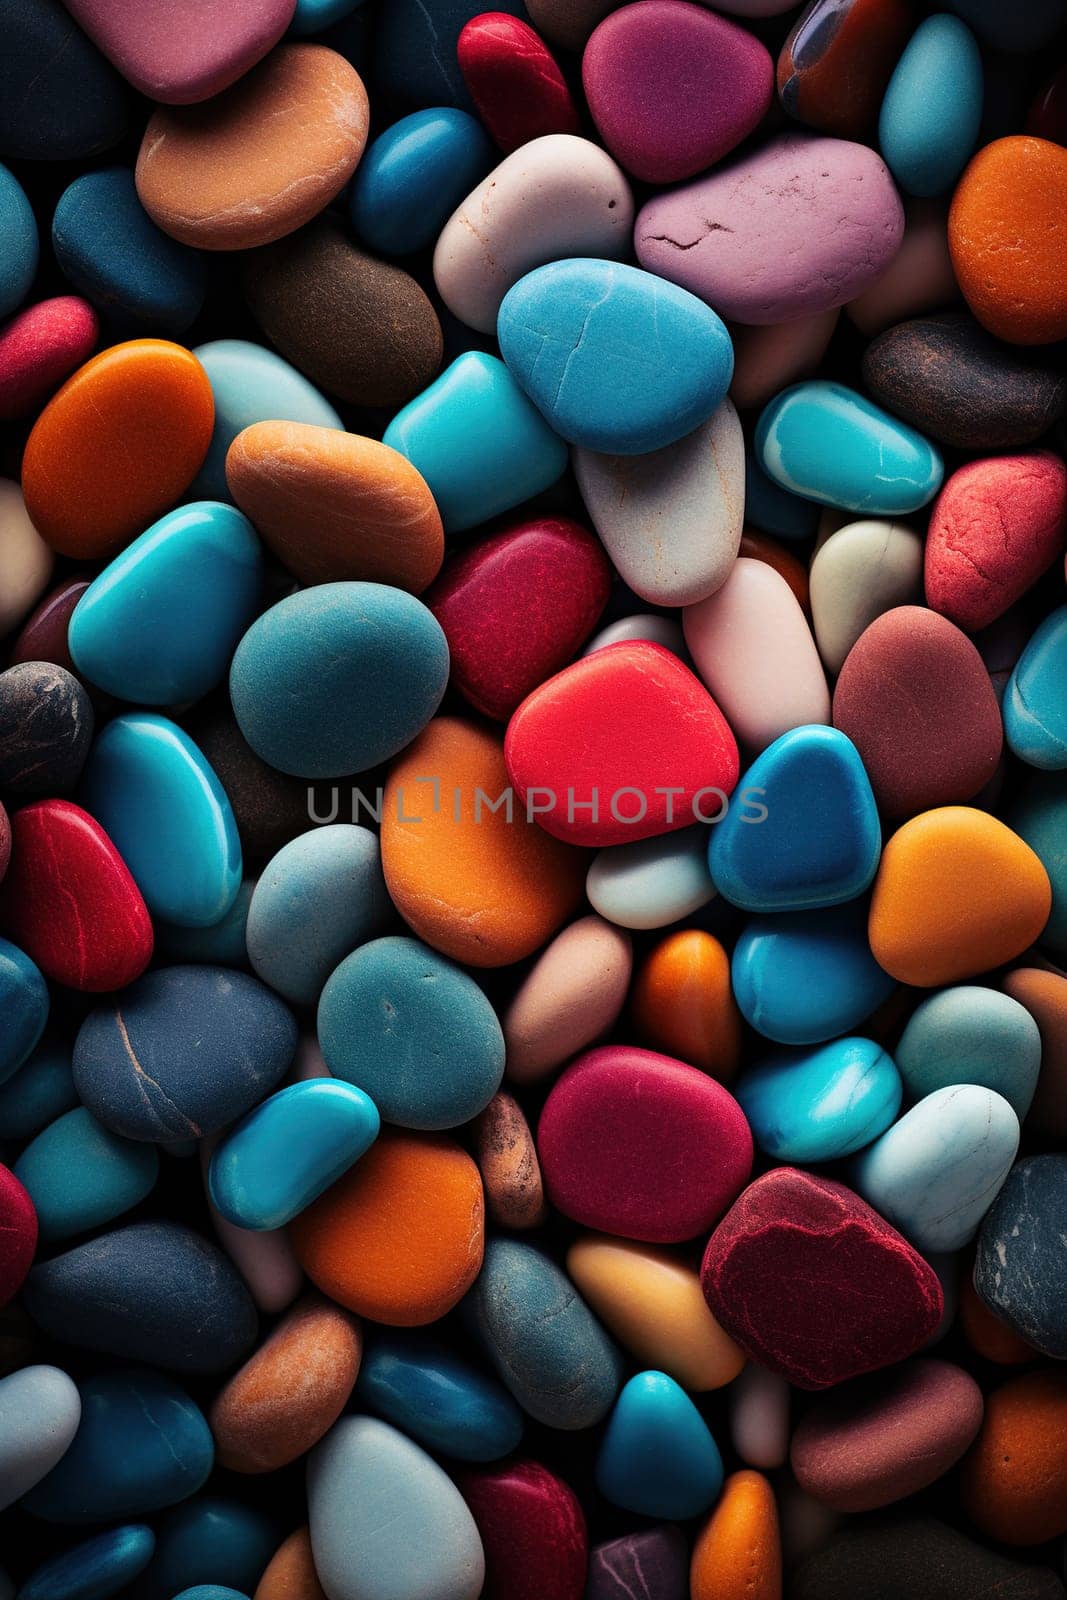 Vertical wallpaper made of multi-colored beach stones. Background of colored pebbles.